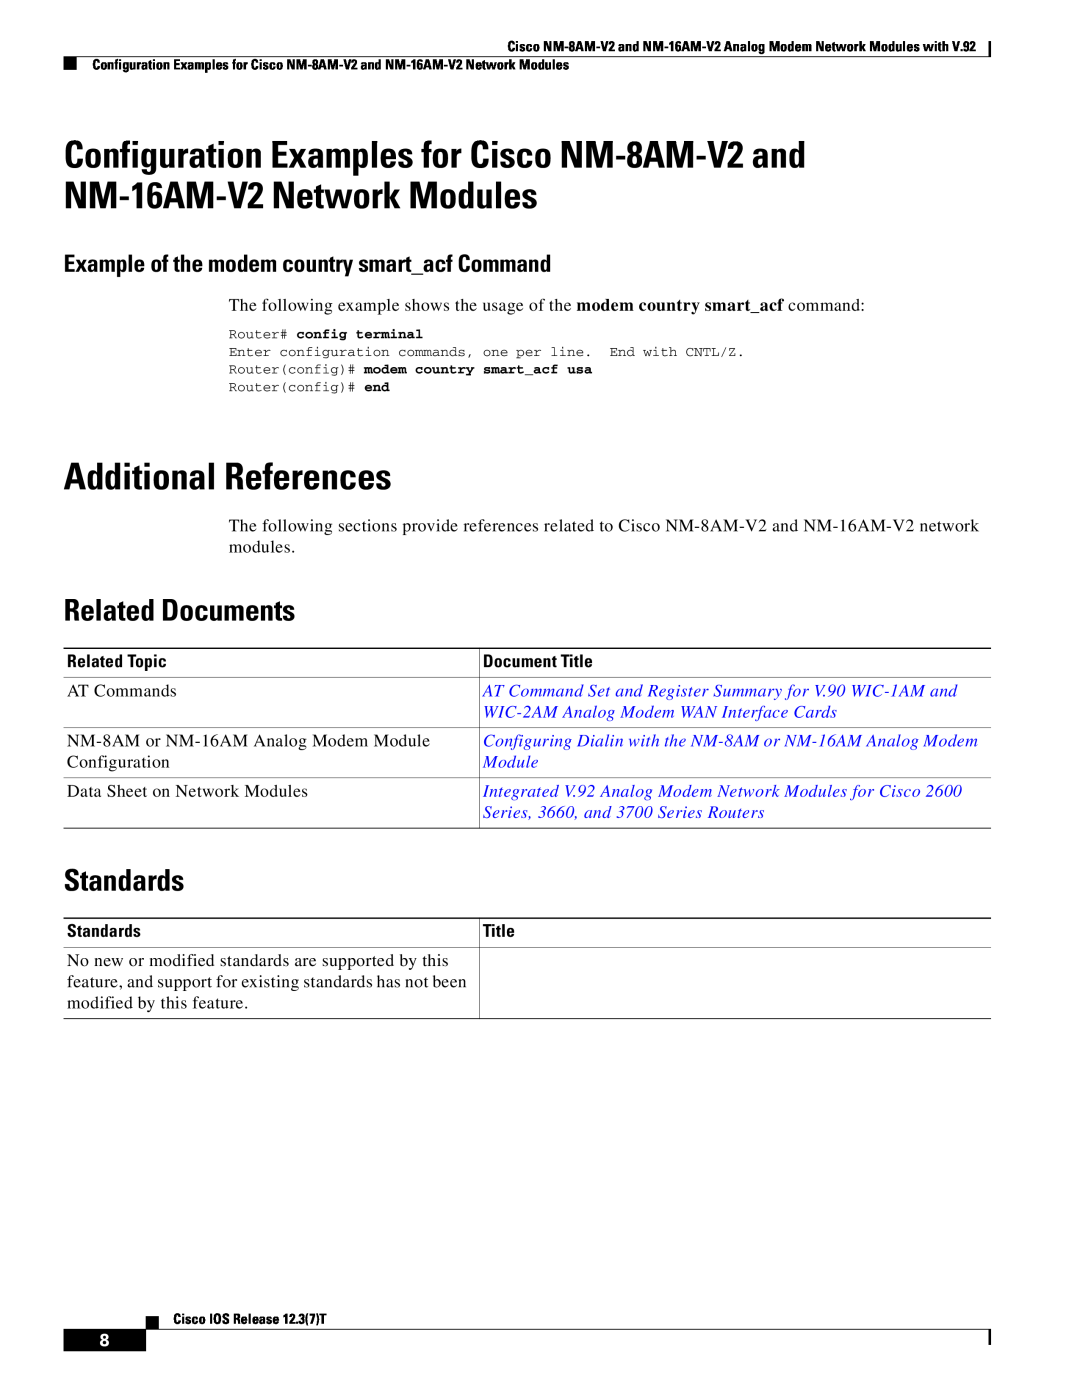 Cisco Systems NM-16AM-V2, NM-8AM-V2 Additional References, Related Documents, Standards, Related Topic, Document Title 